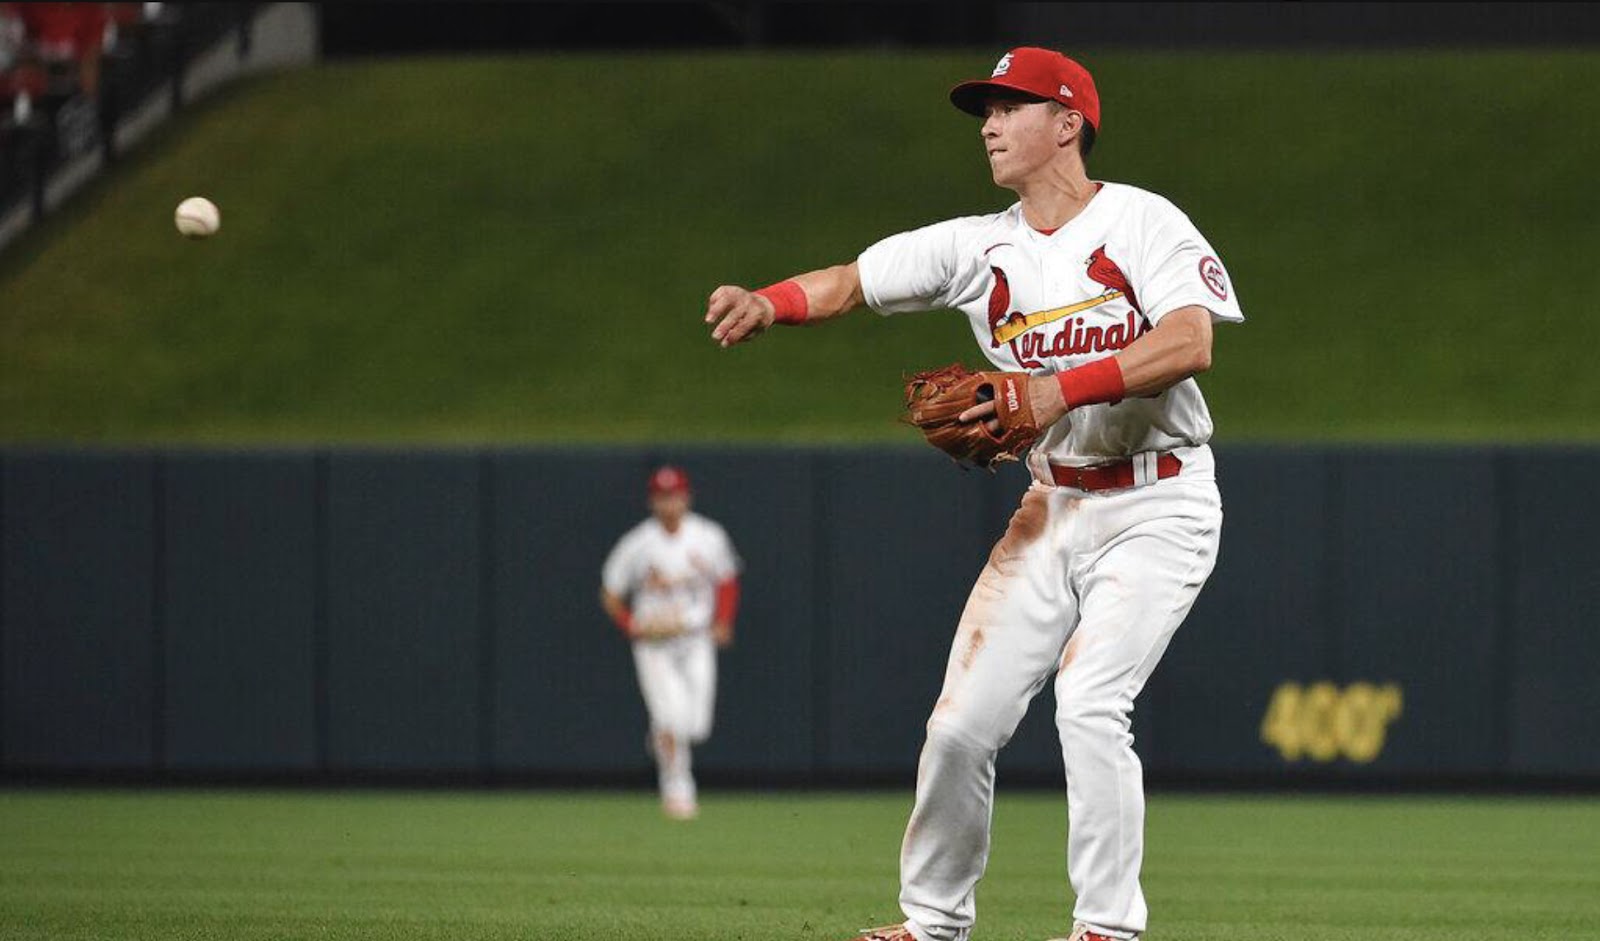 Spikes' Alum Tommy Edman Finds a Perch with the Cardinals